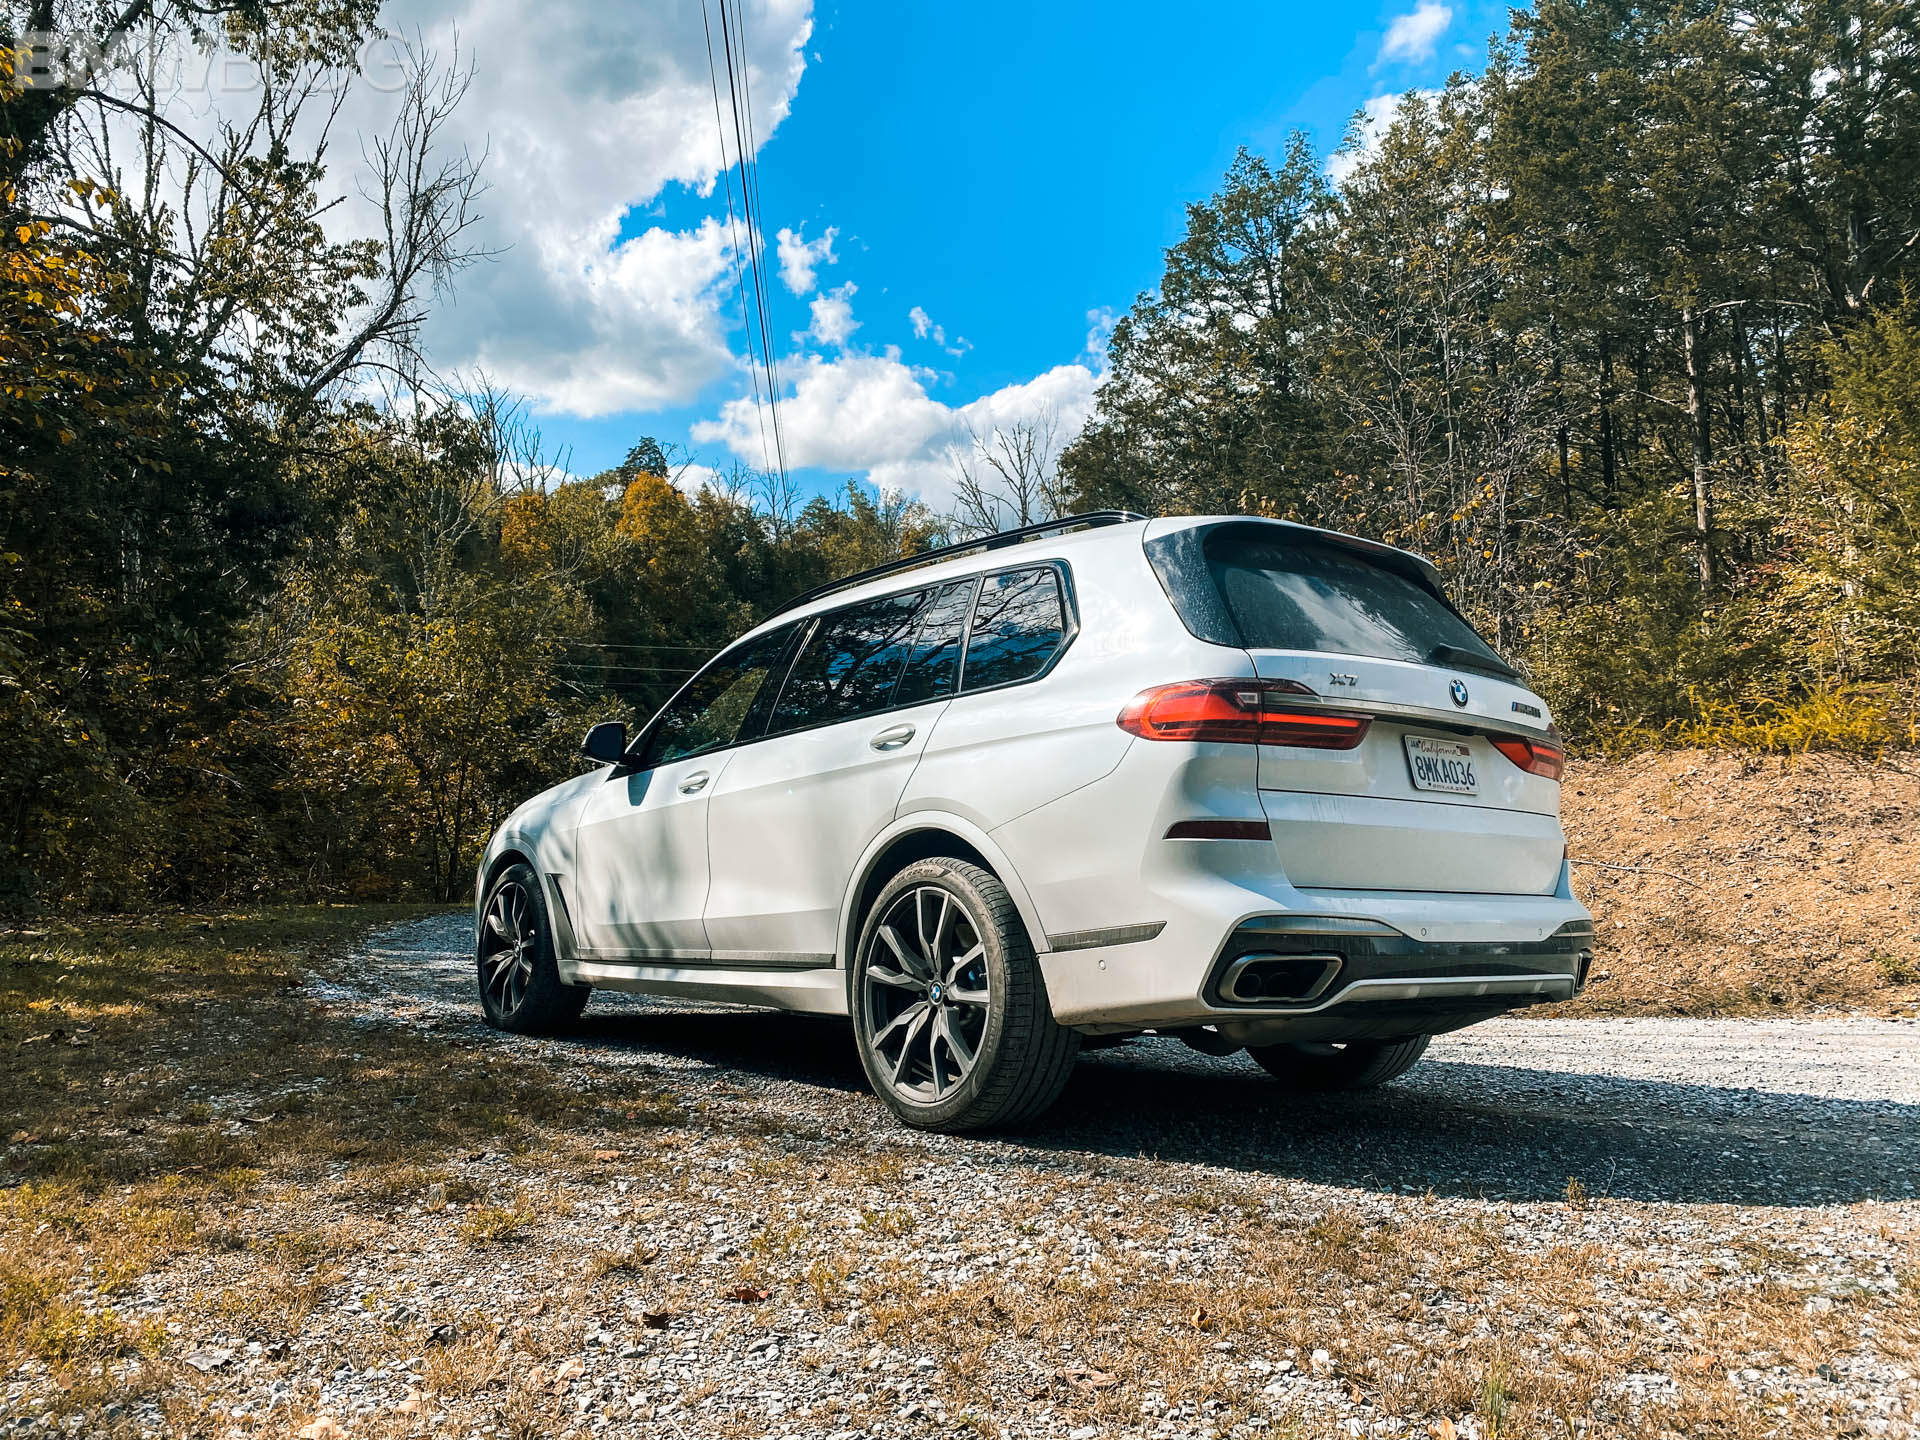 TEST DRIVE: 2020 BMW X7 M50i - The Ultimate Road Companion